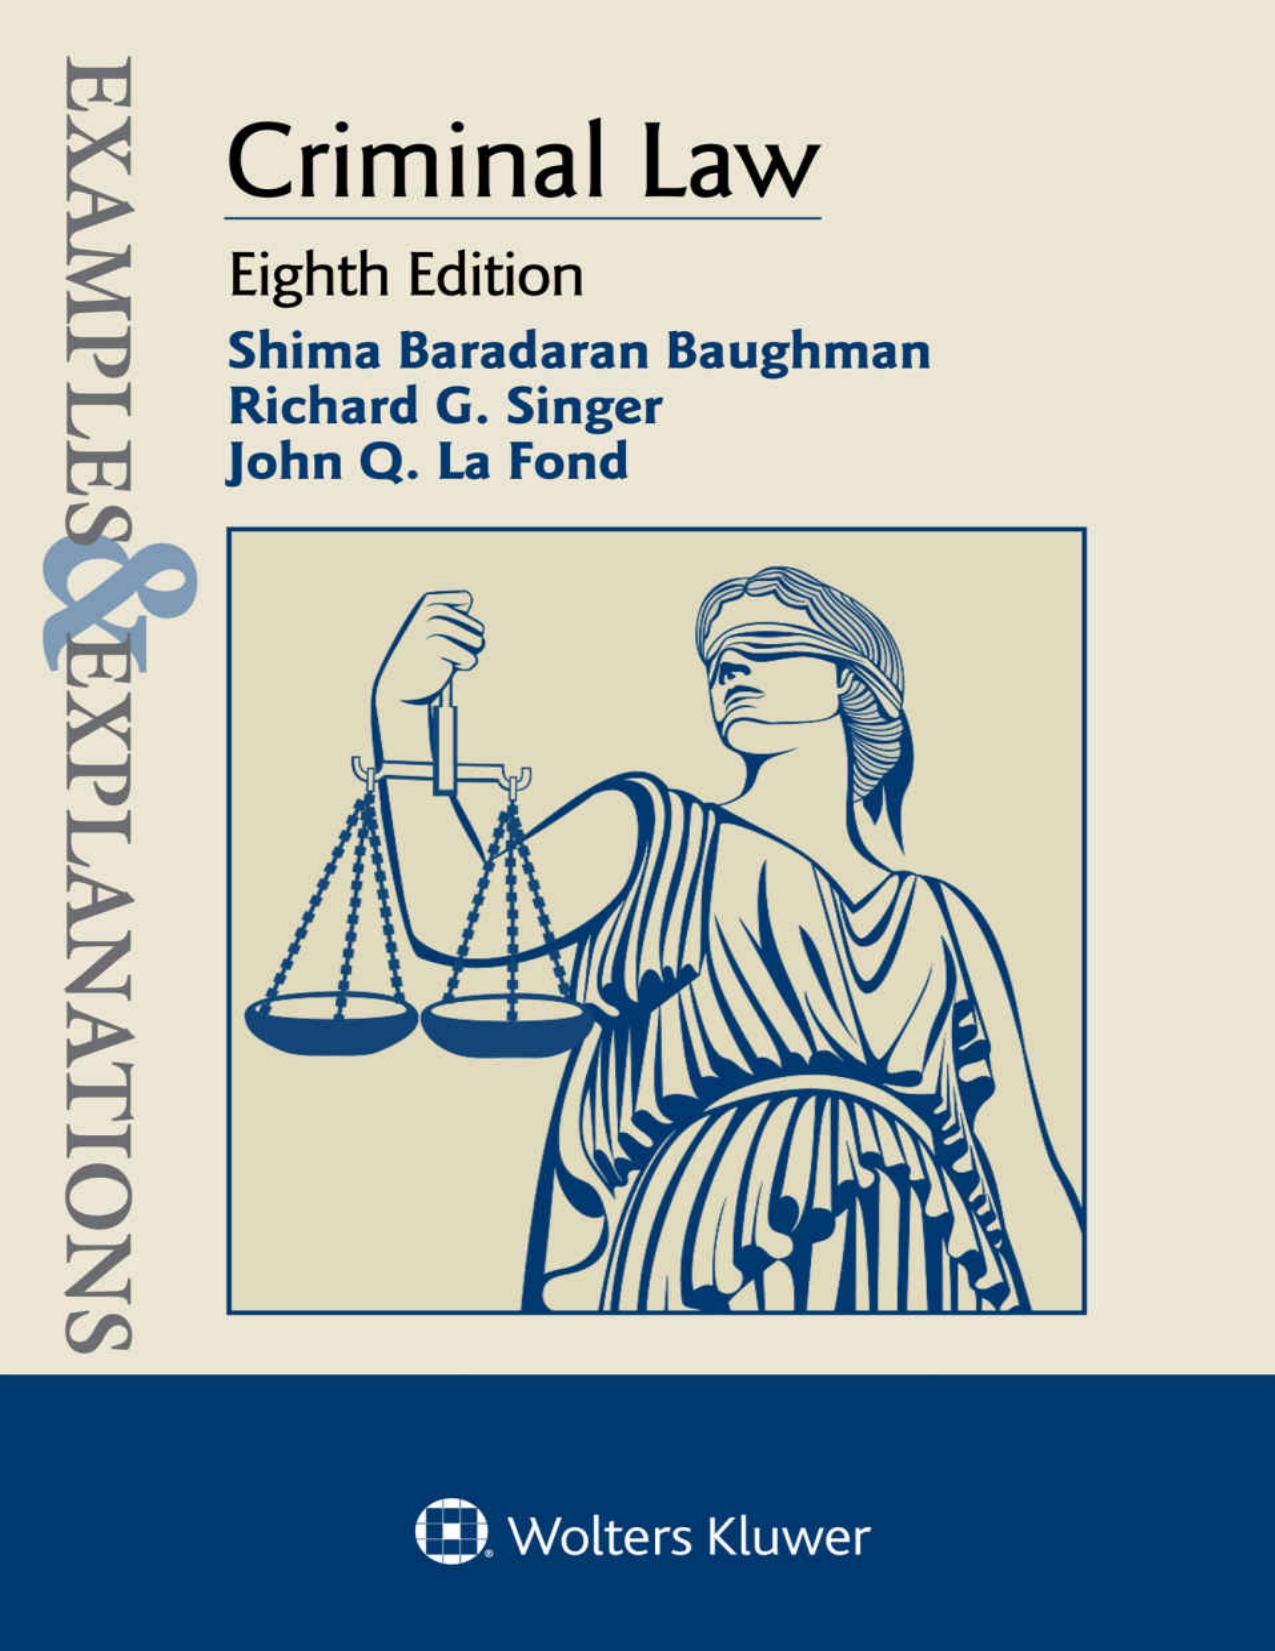 (eBook PDF)Examples & Explanations for Criminal Law (Examples & Explanations Series) 8th Edition by Richard G. Singer